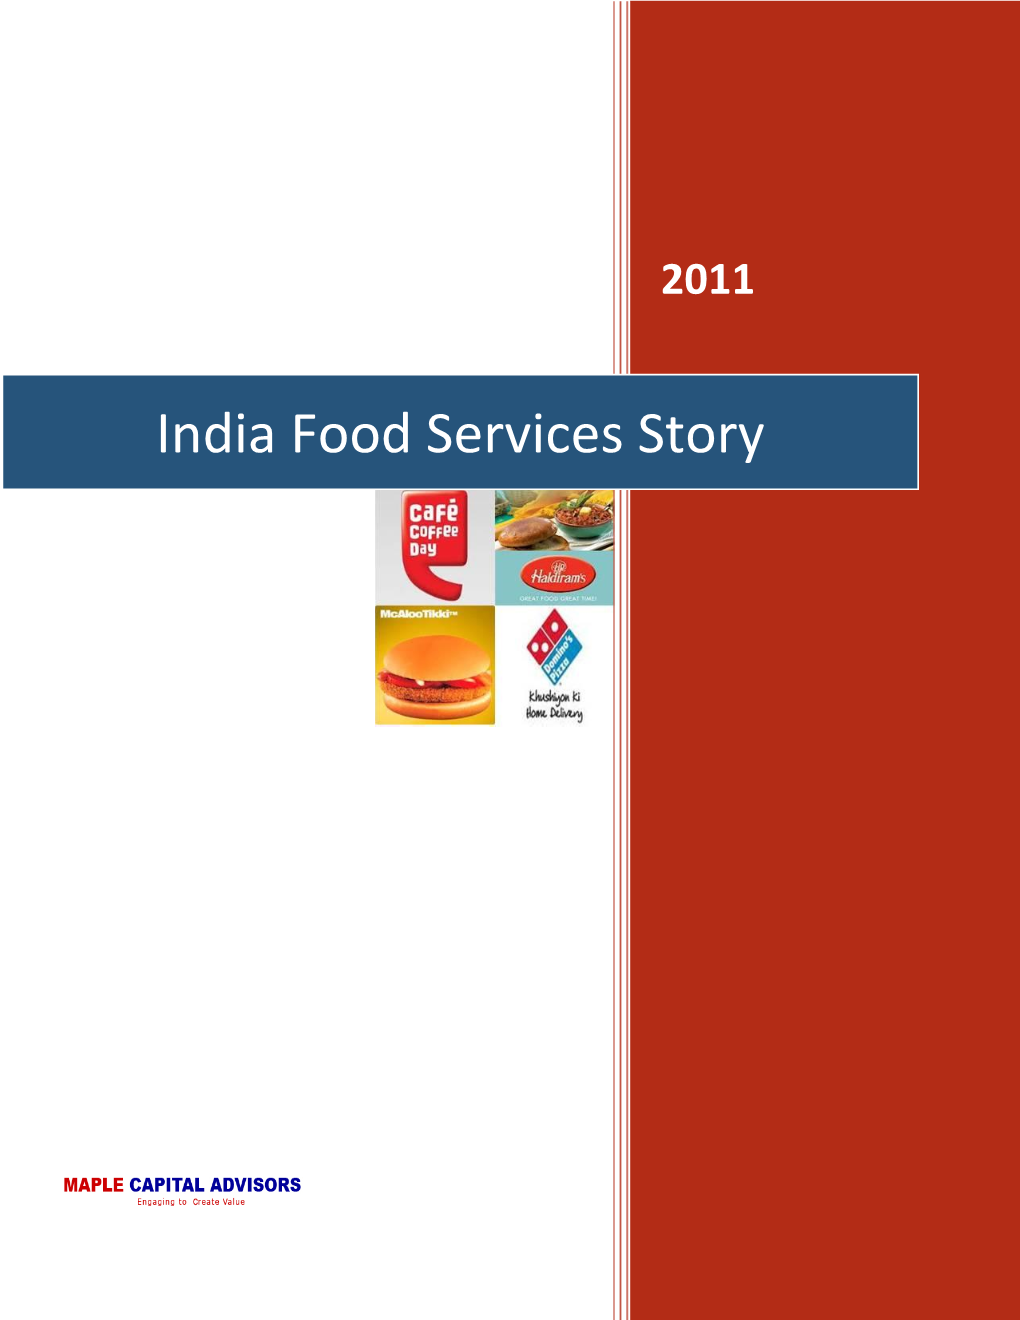 India Food Services Story